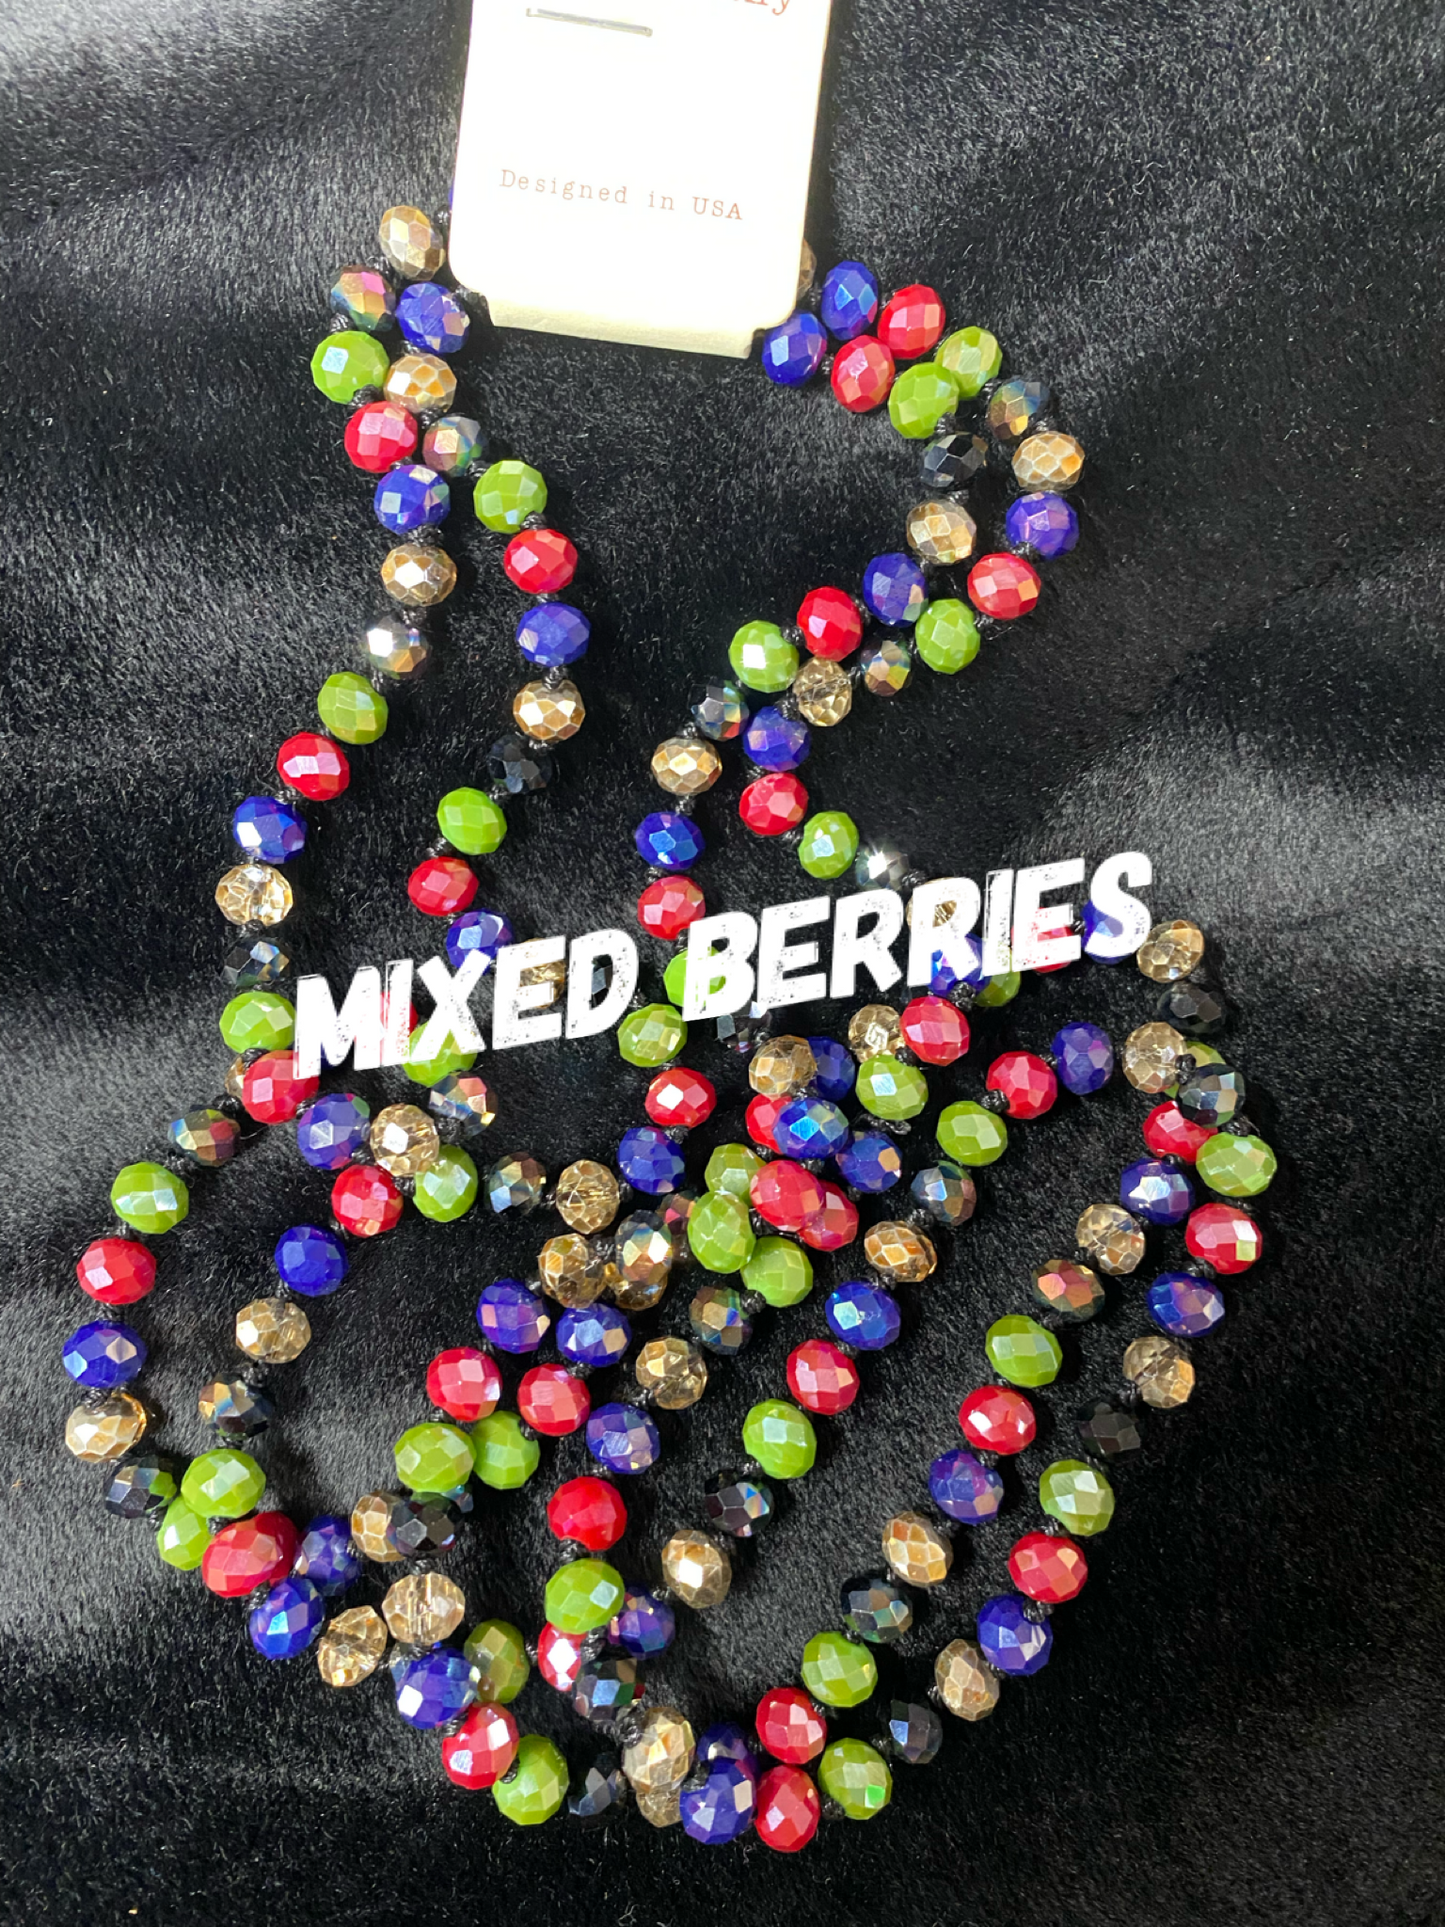 Colored Beads Necklace